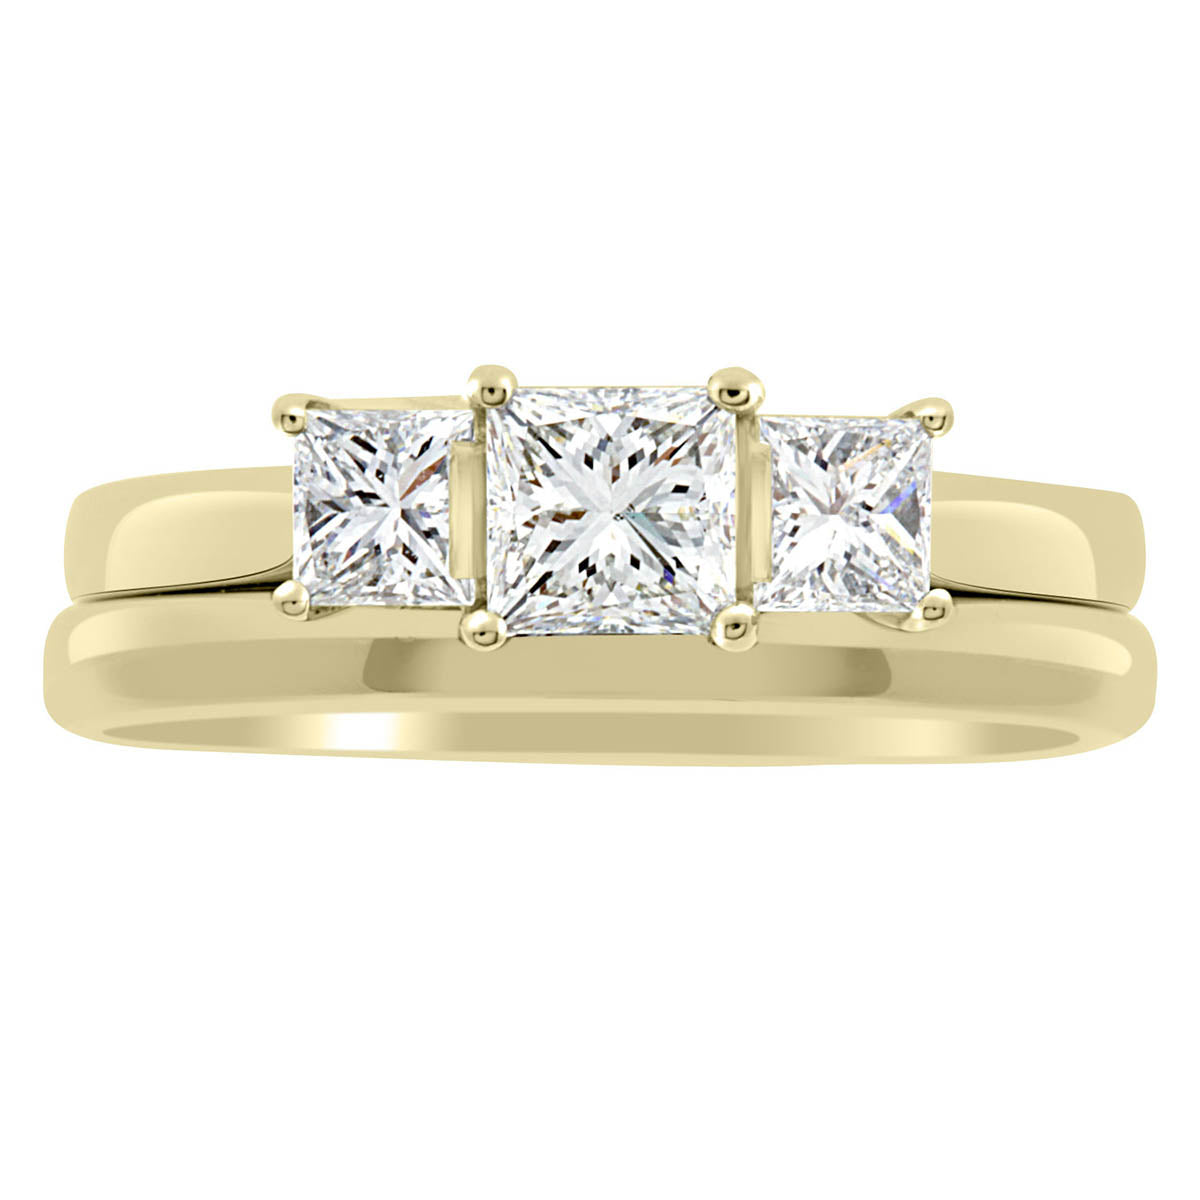 Three Stone Princess Cut Diamond Ring made from yellow gold with a matching wedding ring